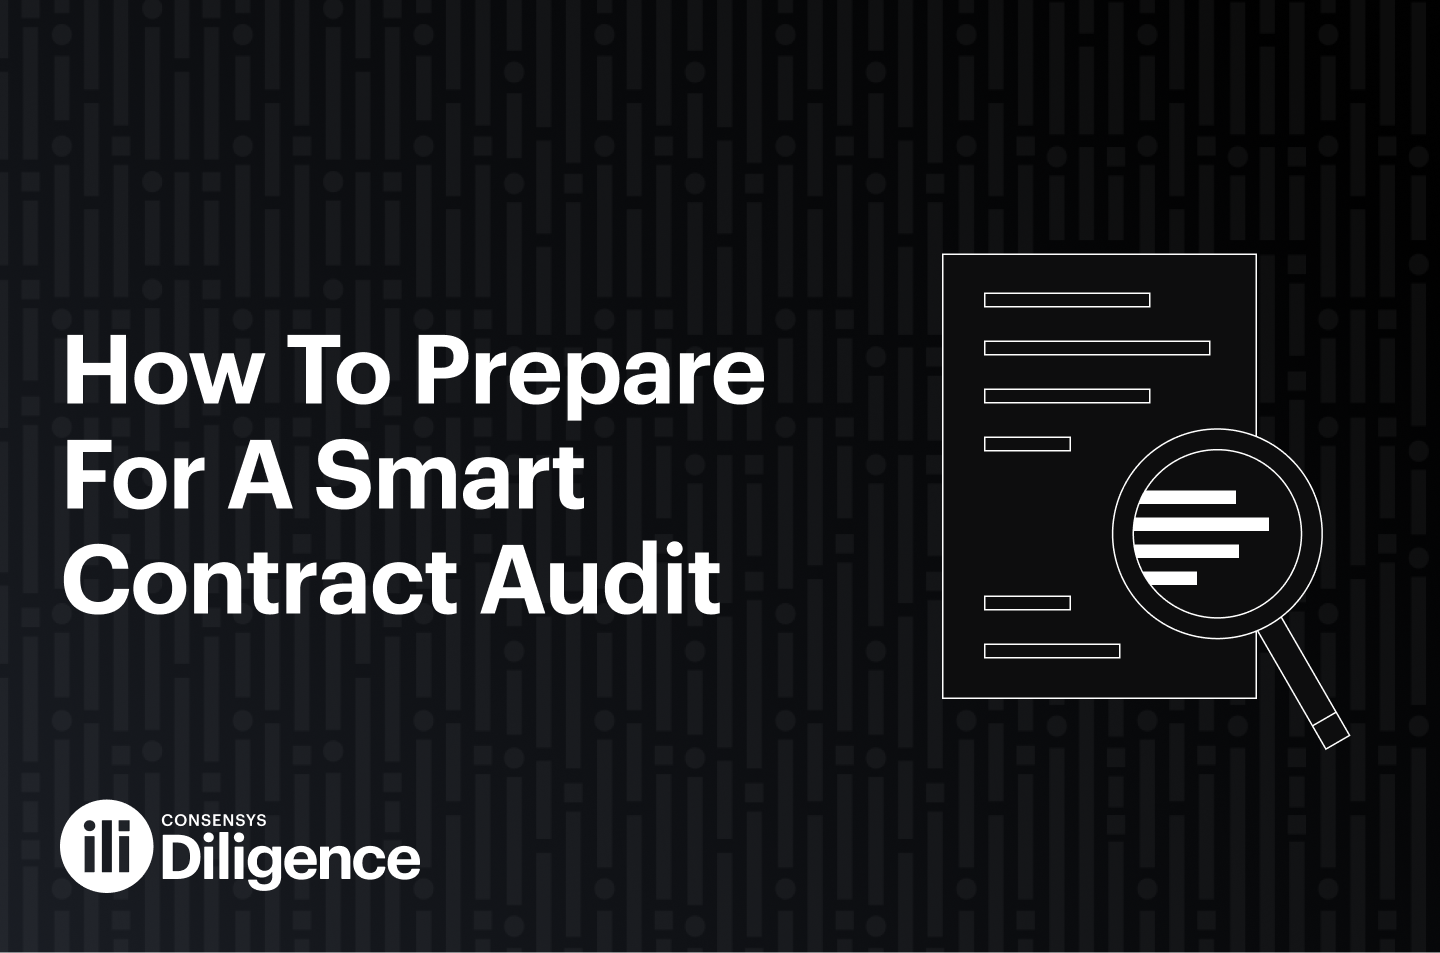 How to Prepare for a Smart Contract Audit with ConsenSys Diligence